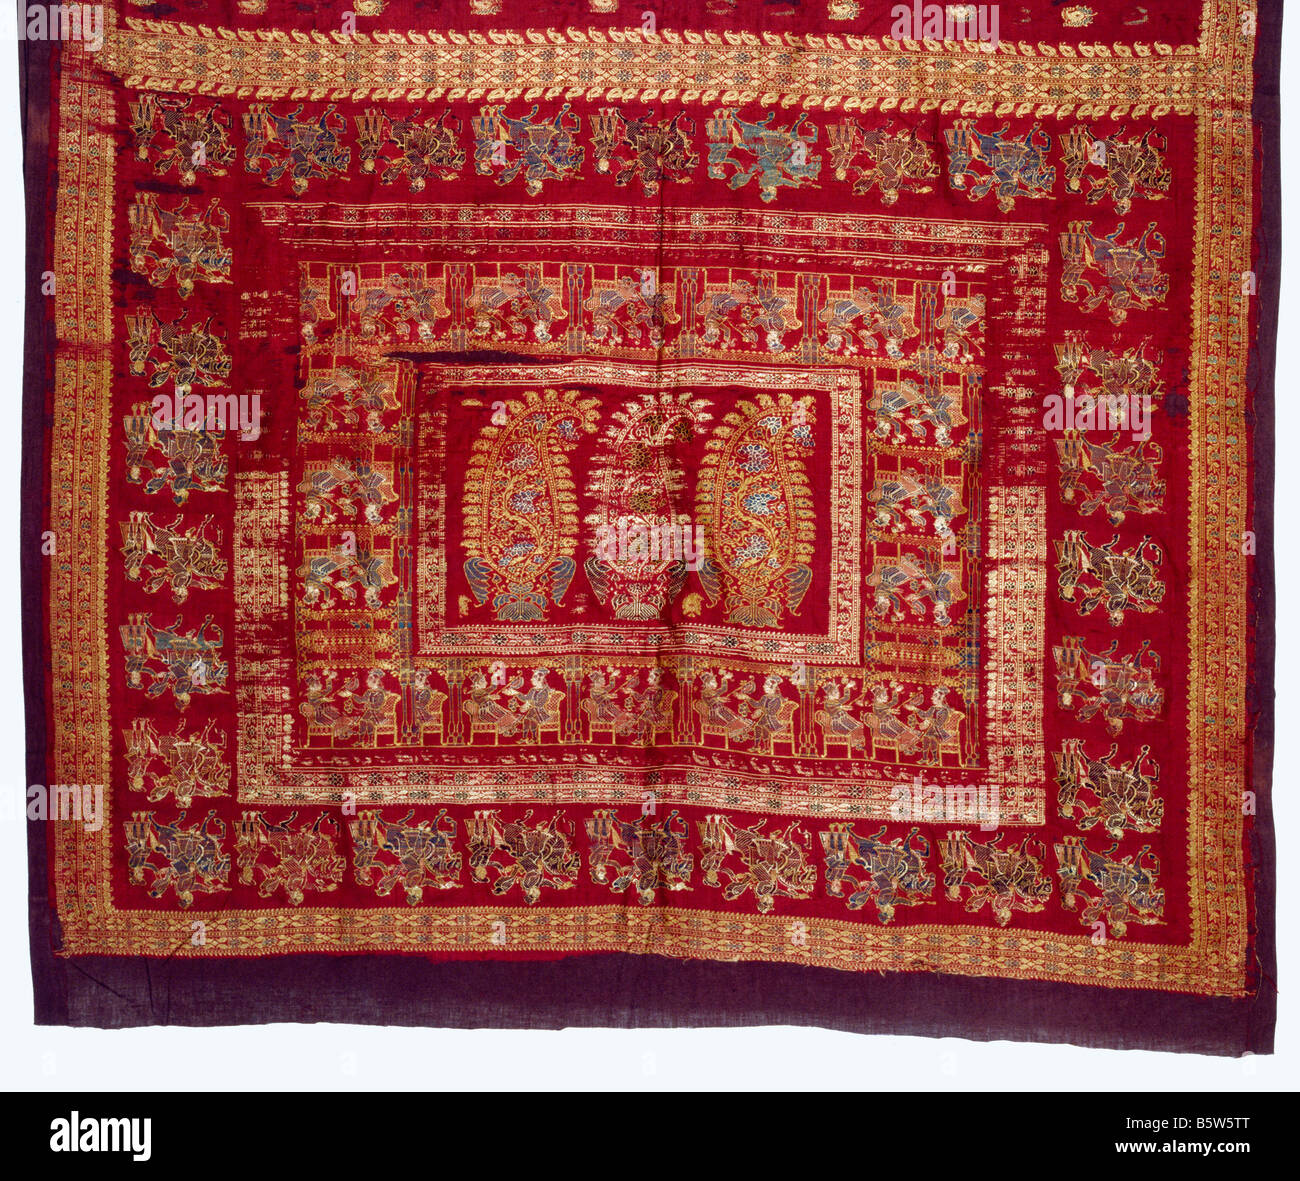 Kantha cotton stitched & embroidered. Bengal. 19th century. National Museum of New Delhi india61.388. 181 x 125 cm Stock Photo